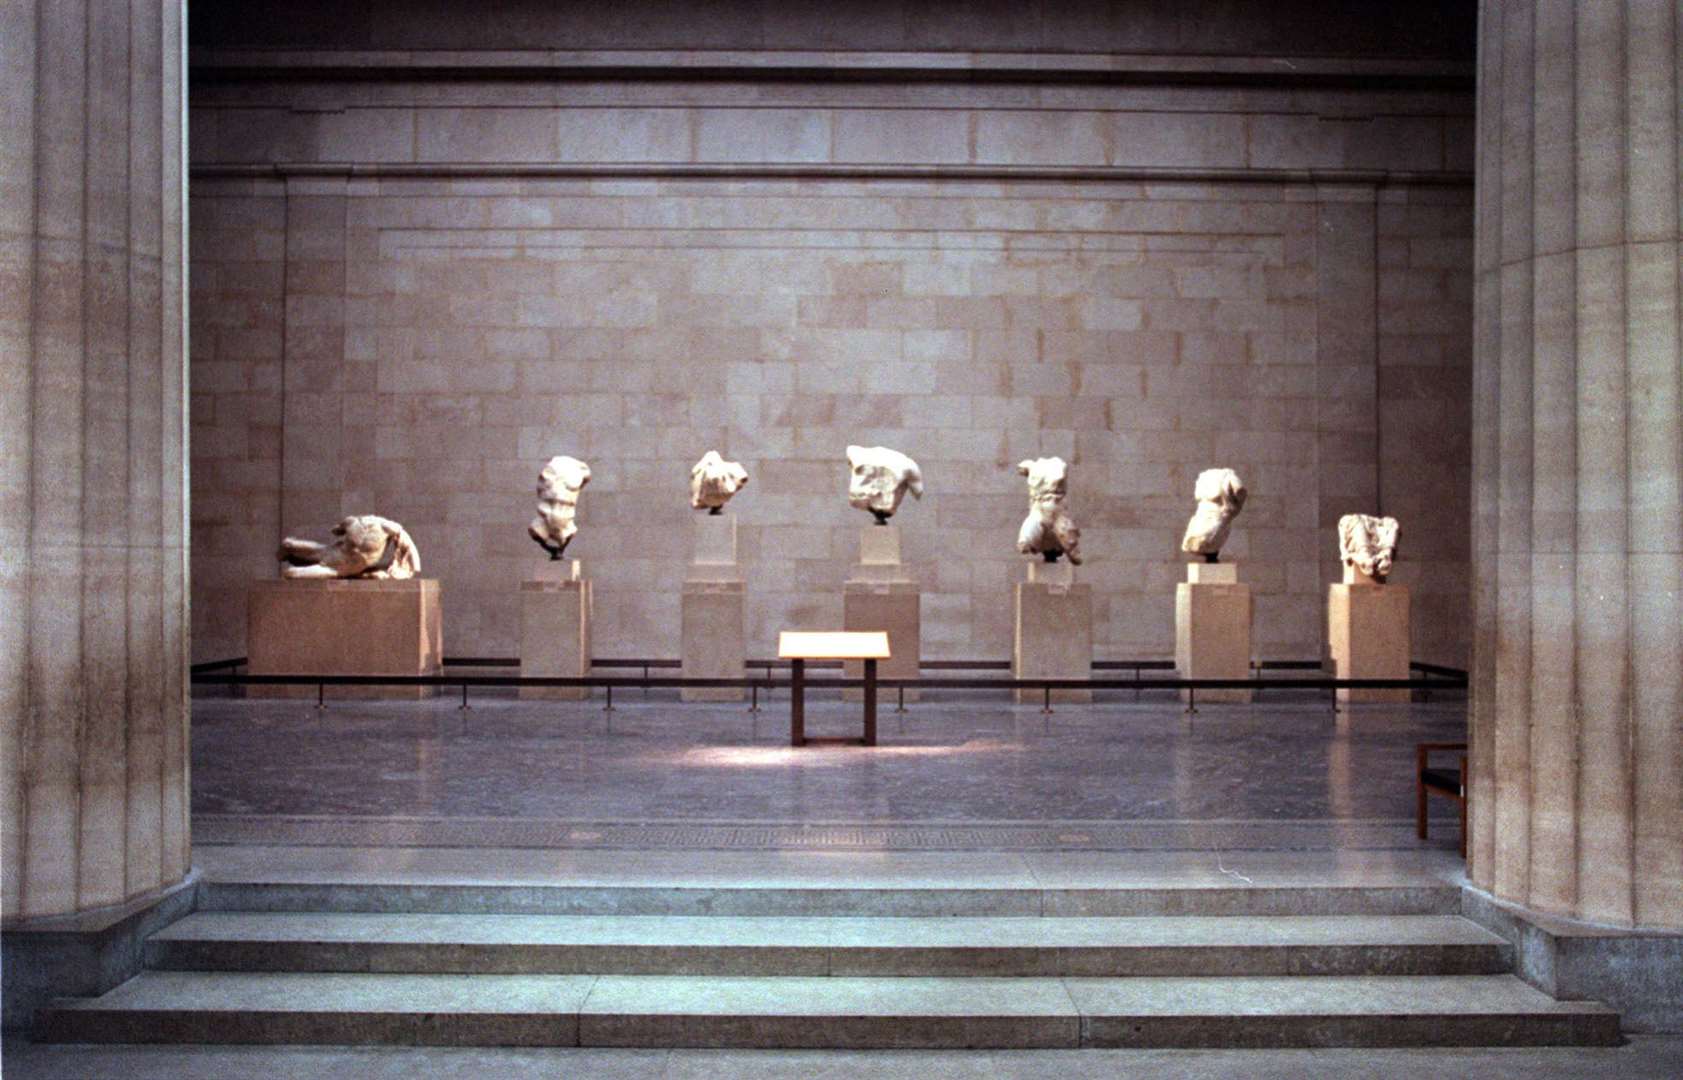 The Parthenon Sculptures, also known as the Elgin Marbles, are on display in the British Museum (Matthew Fearn/PA)